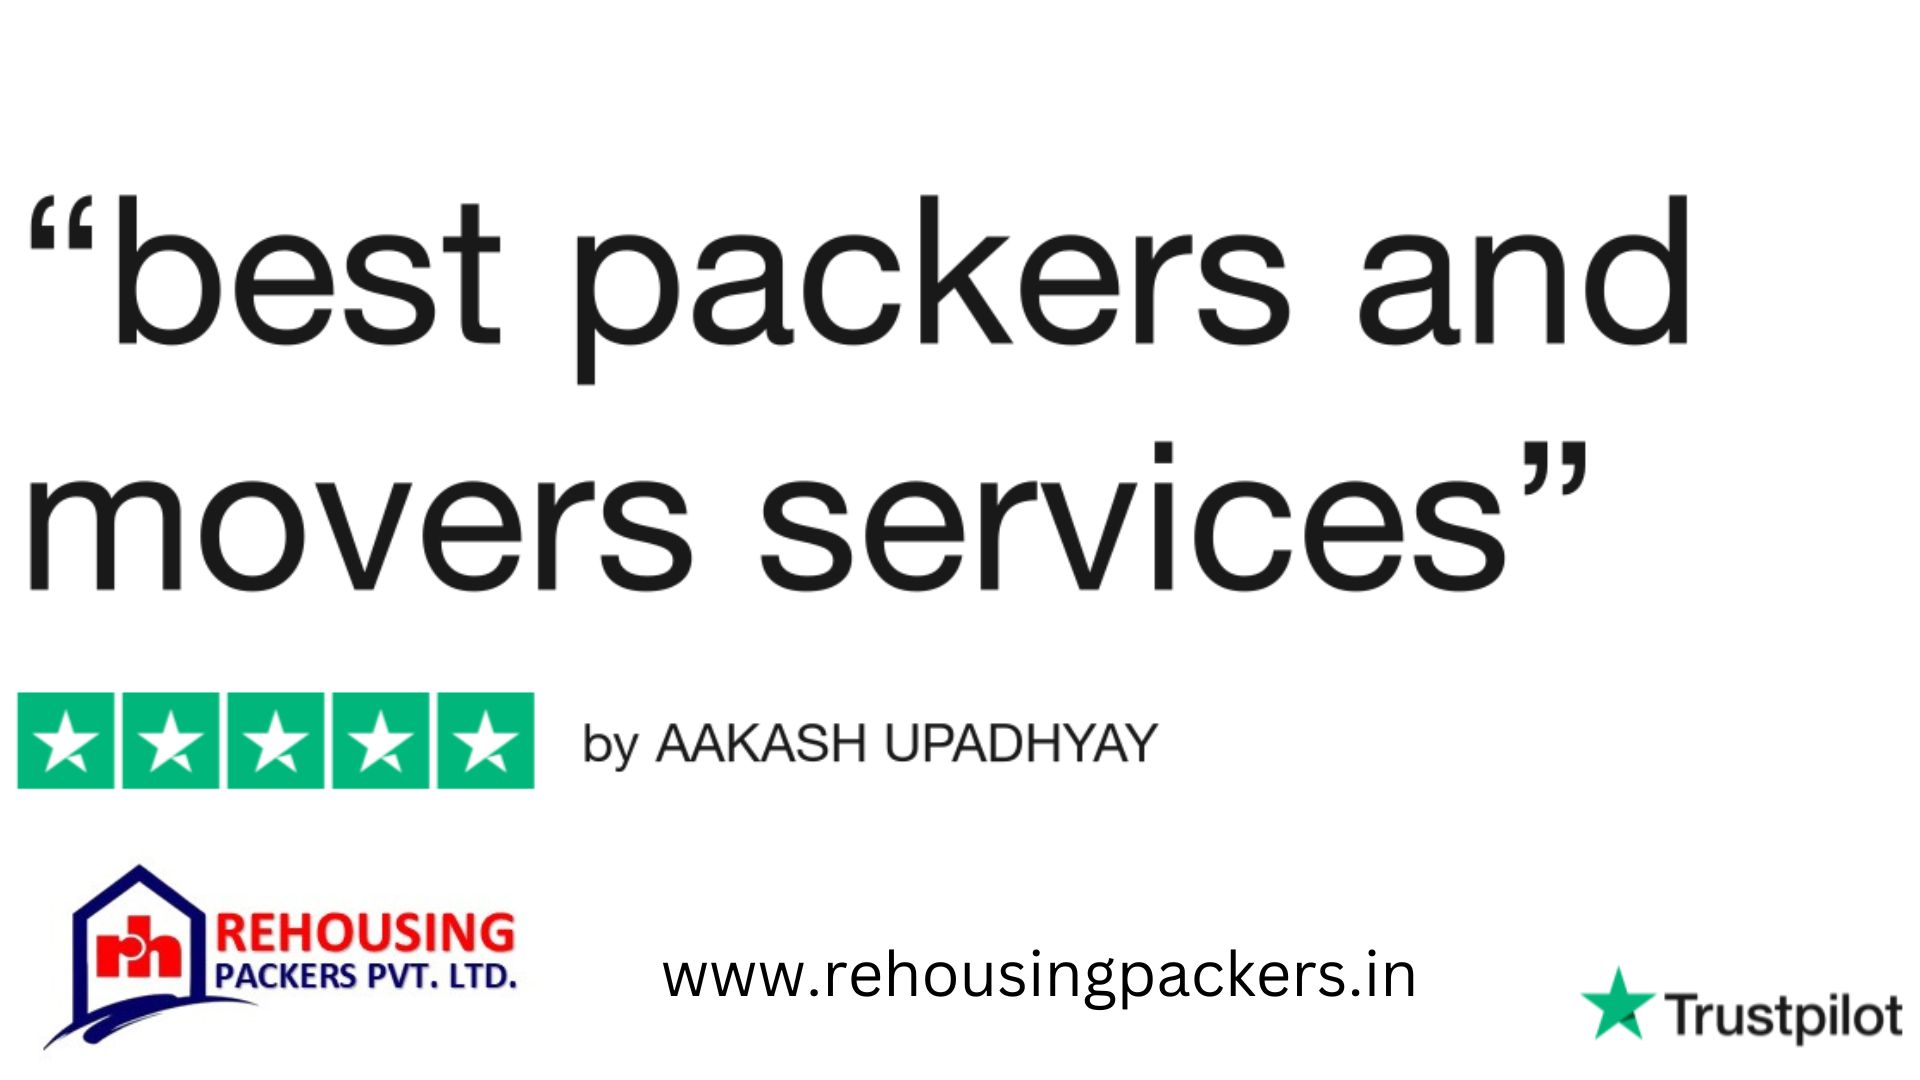 Rehousing packers and movers reviews trustpilot 8